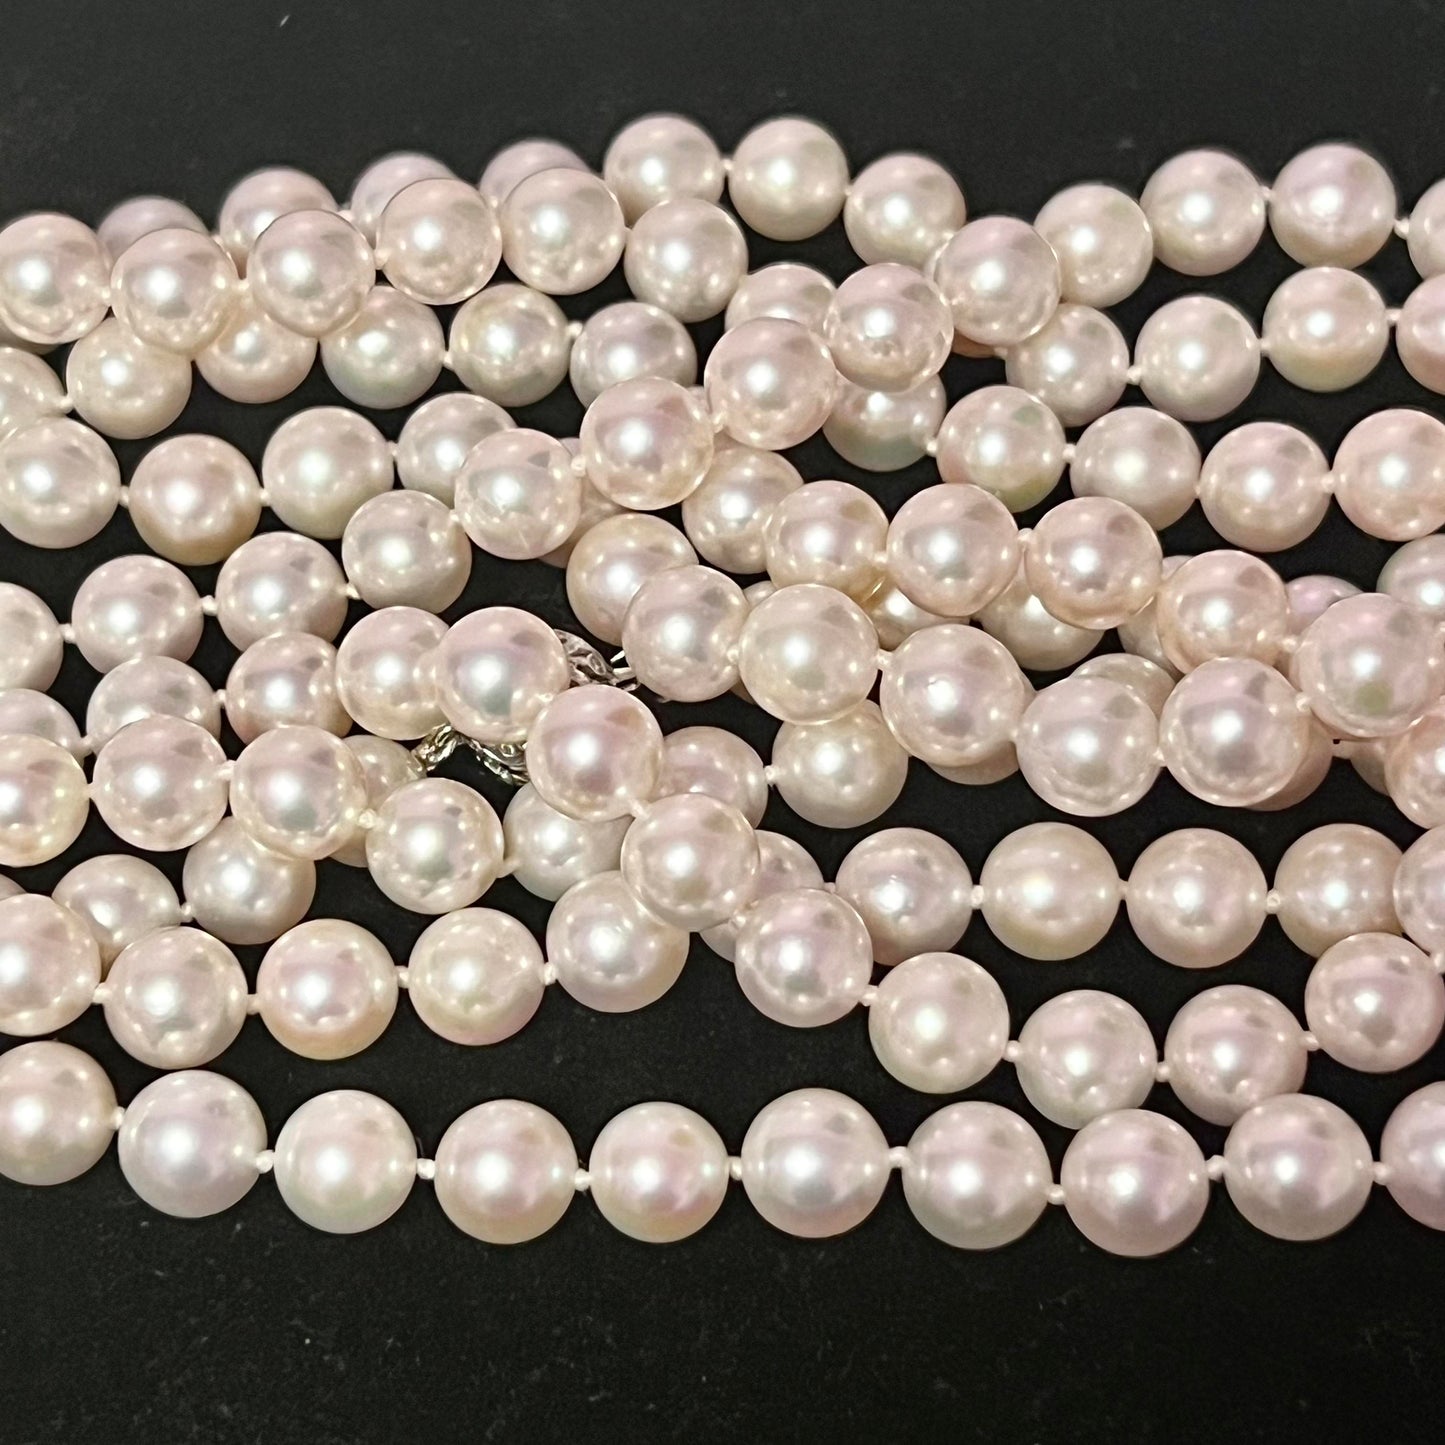 Natural Akoya Pearl Diamond Necklace 60.5" 18k White Gold 8 mm Certified $7,950 307925 - Certified Fine Jewelry